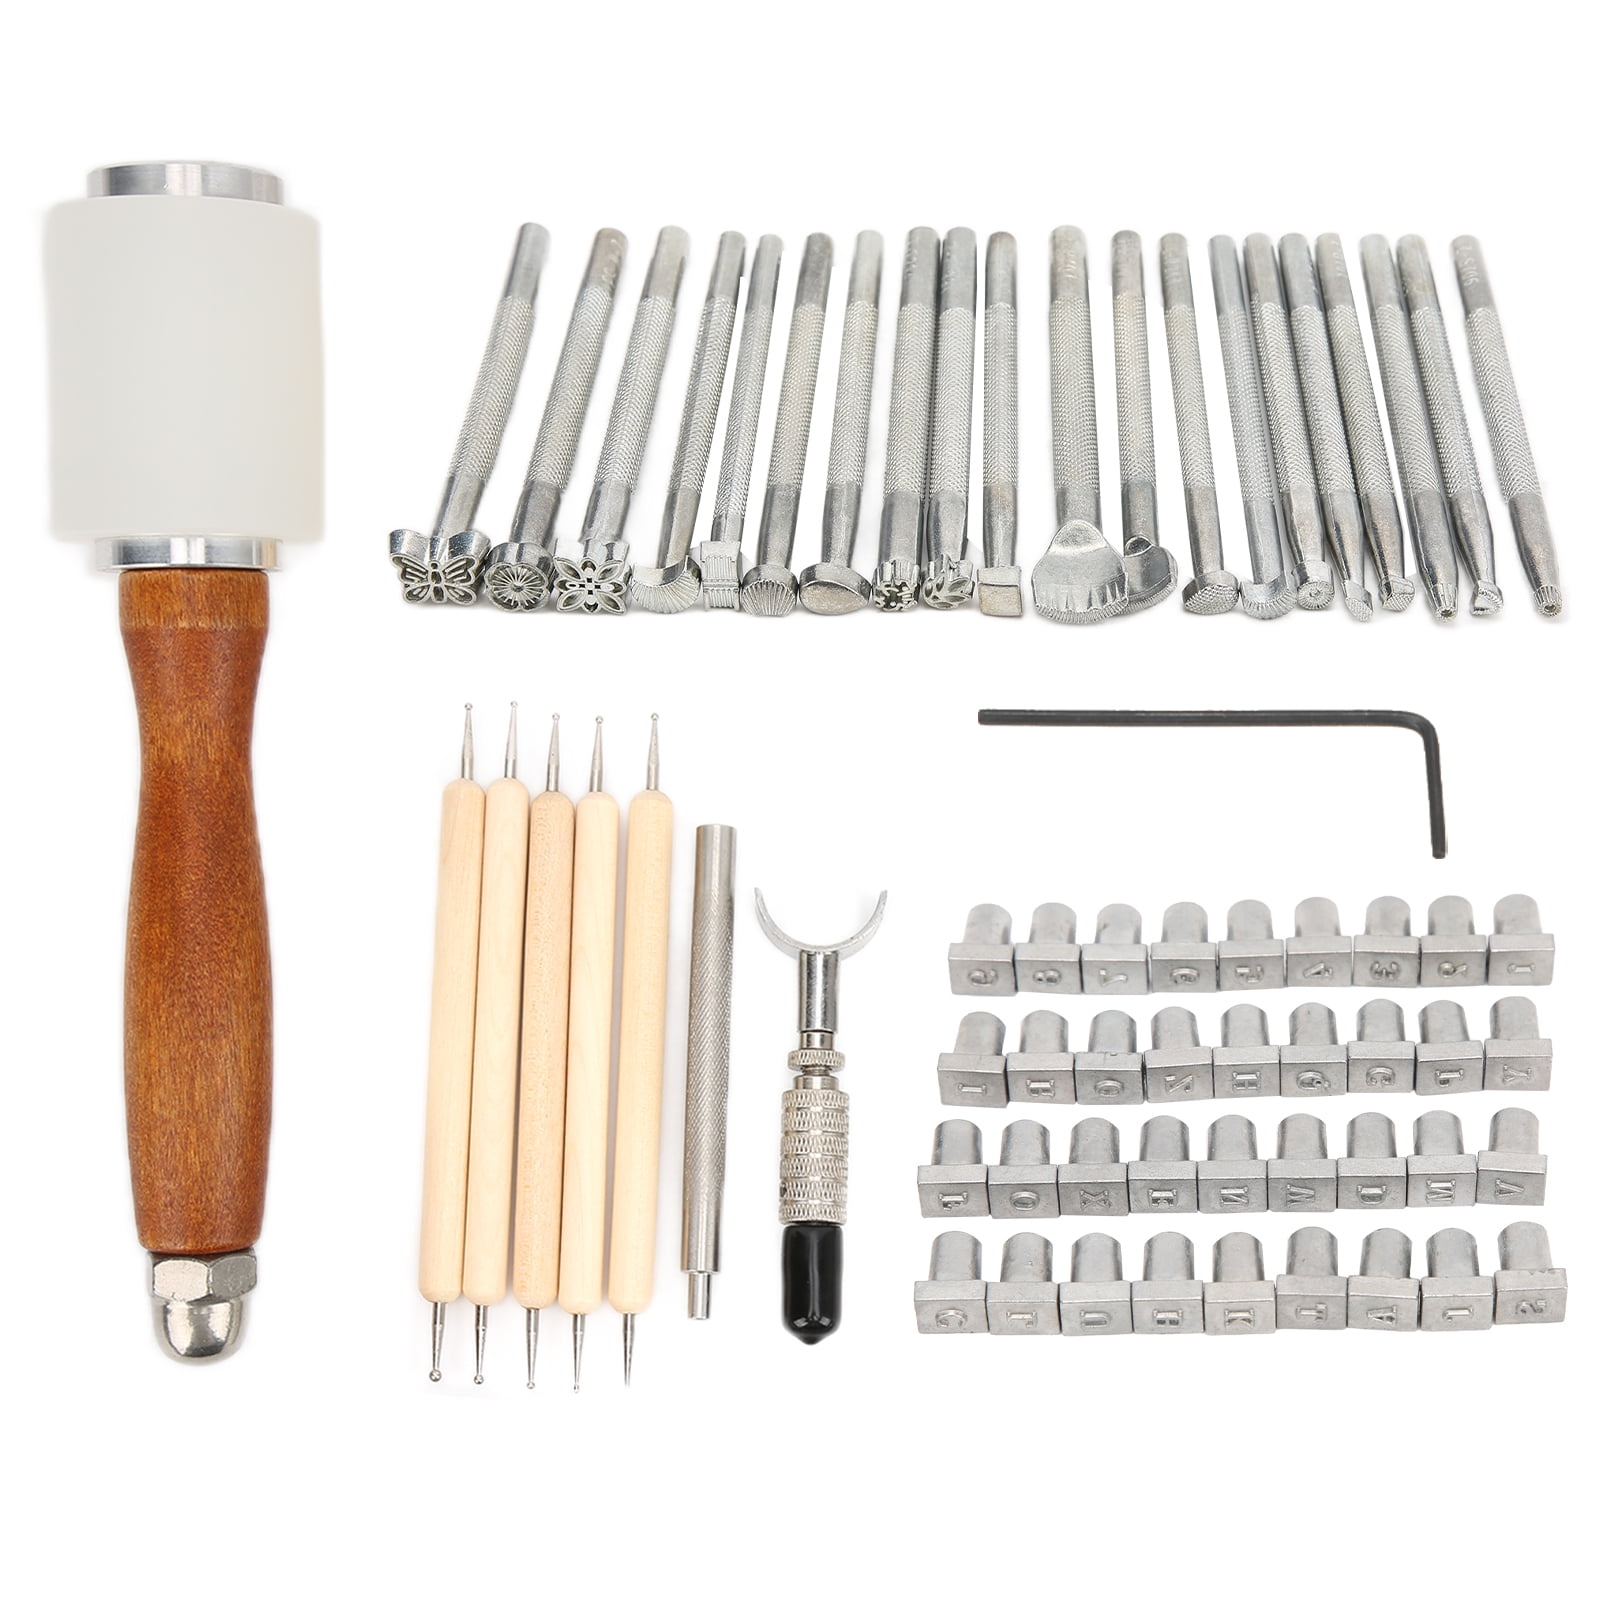 Leather Crafting Tools Kit, 57pcs Leather Working Tools Set with Groover  Awl Waxed Thread Thimble Kit for Leather Making Projects 